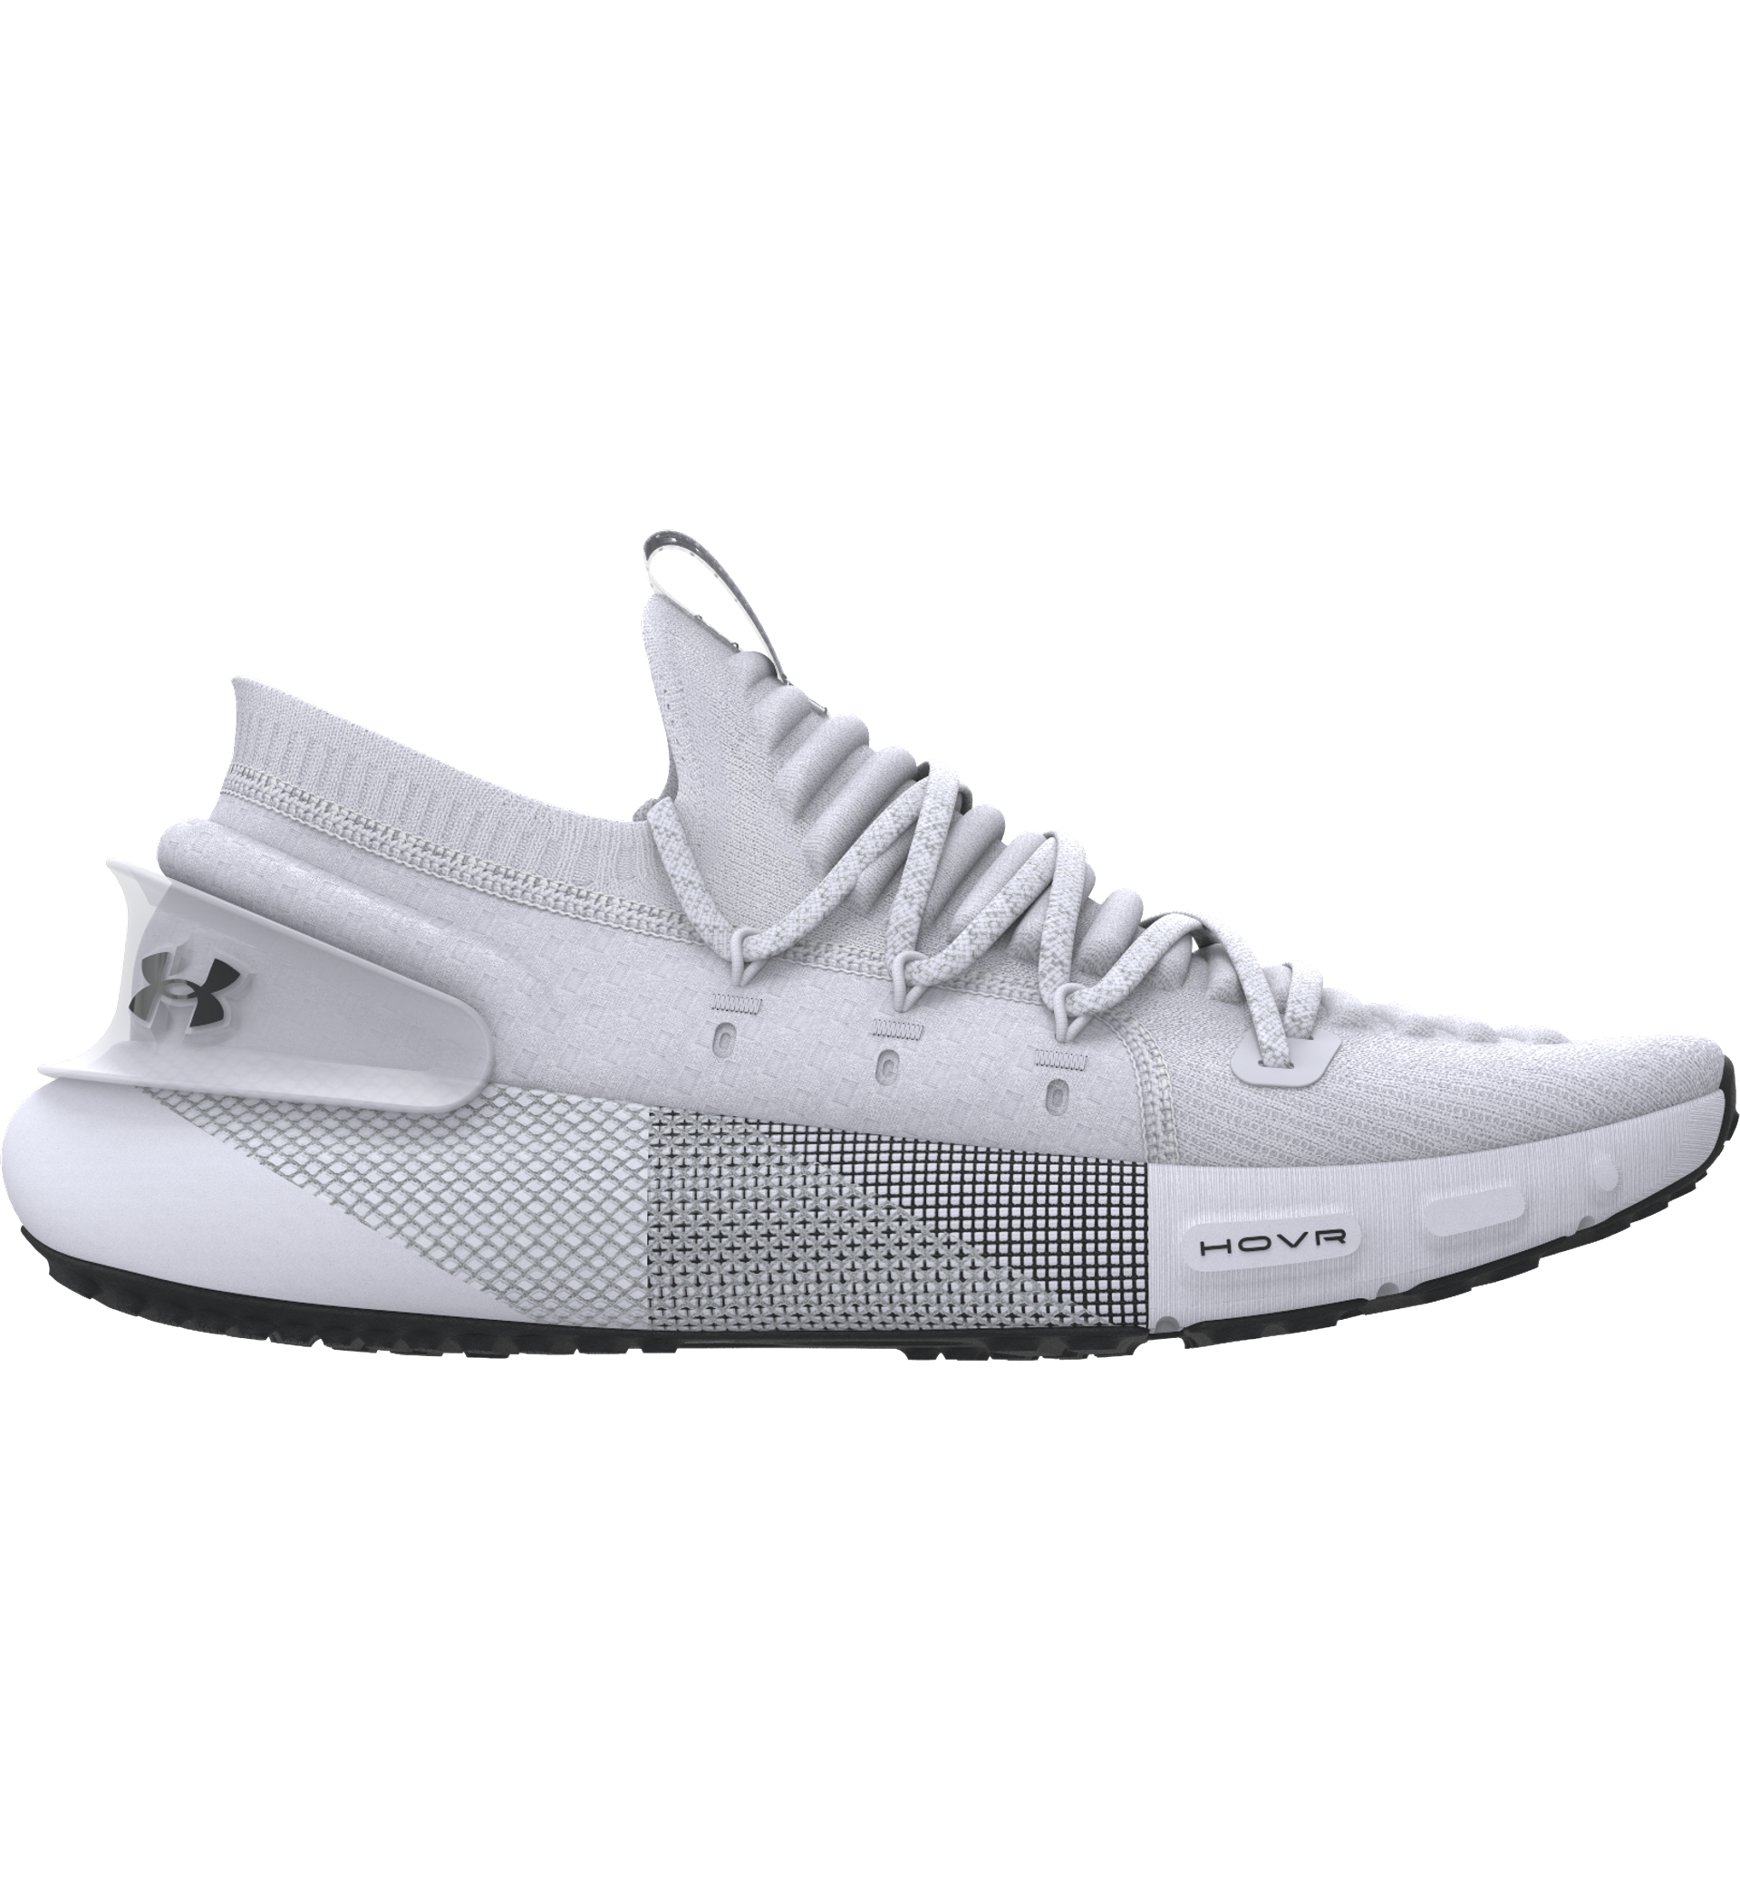 Under Armour Hovr Pahntom 3 Sneakers Damen